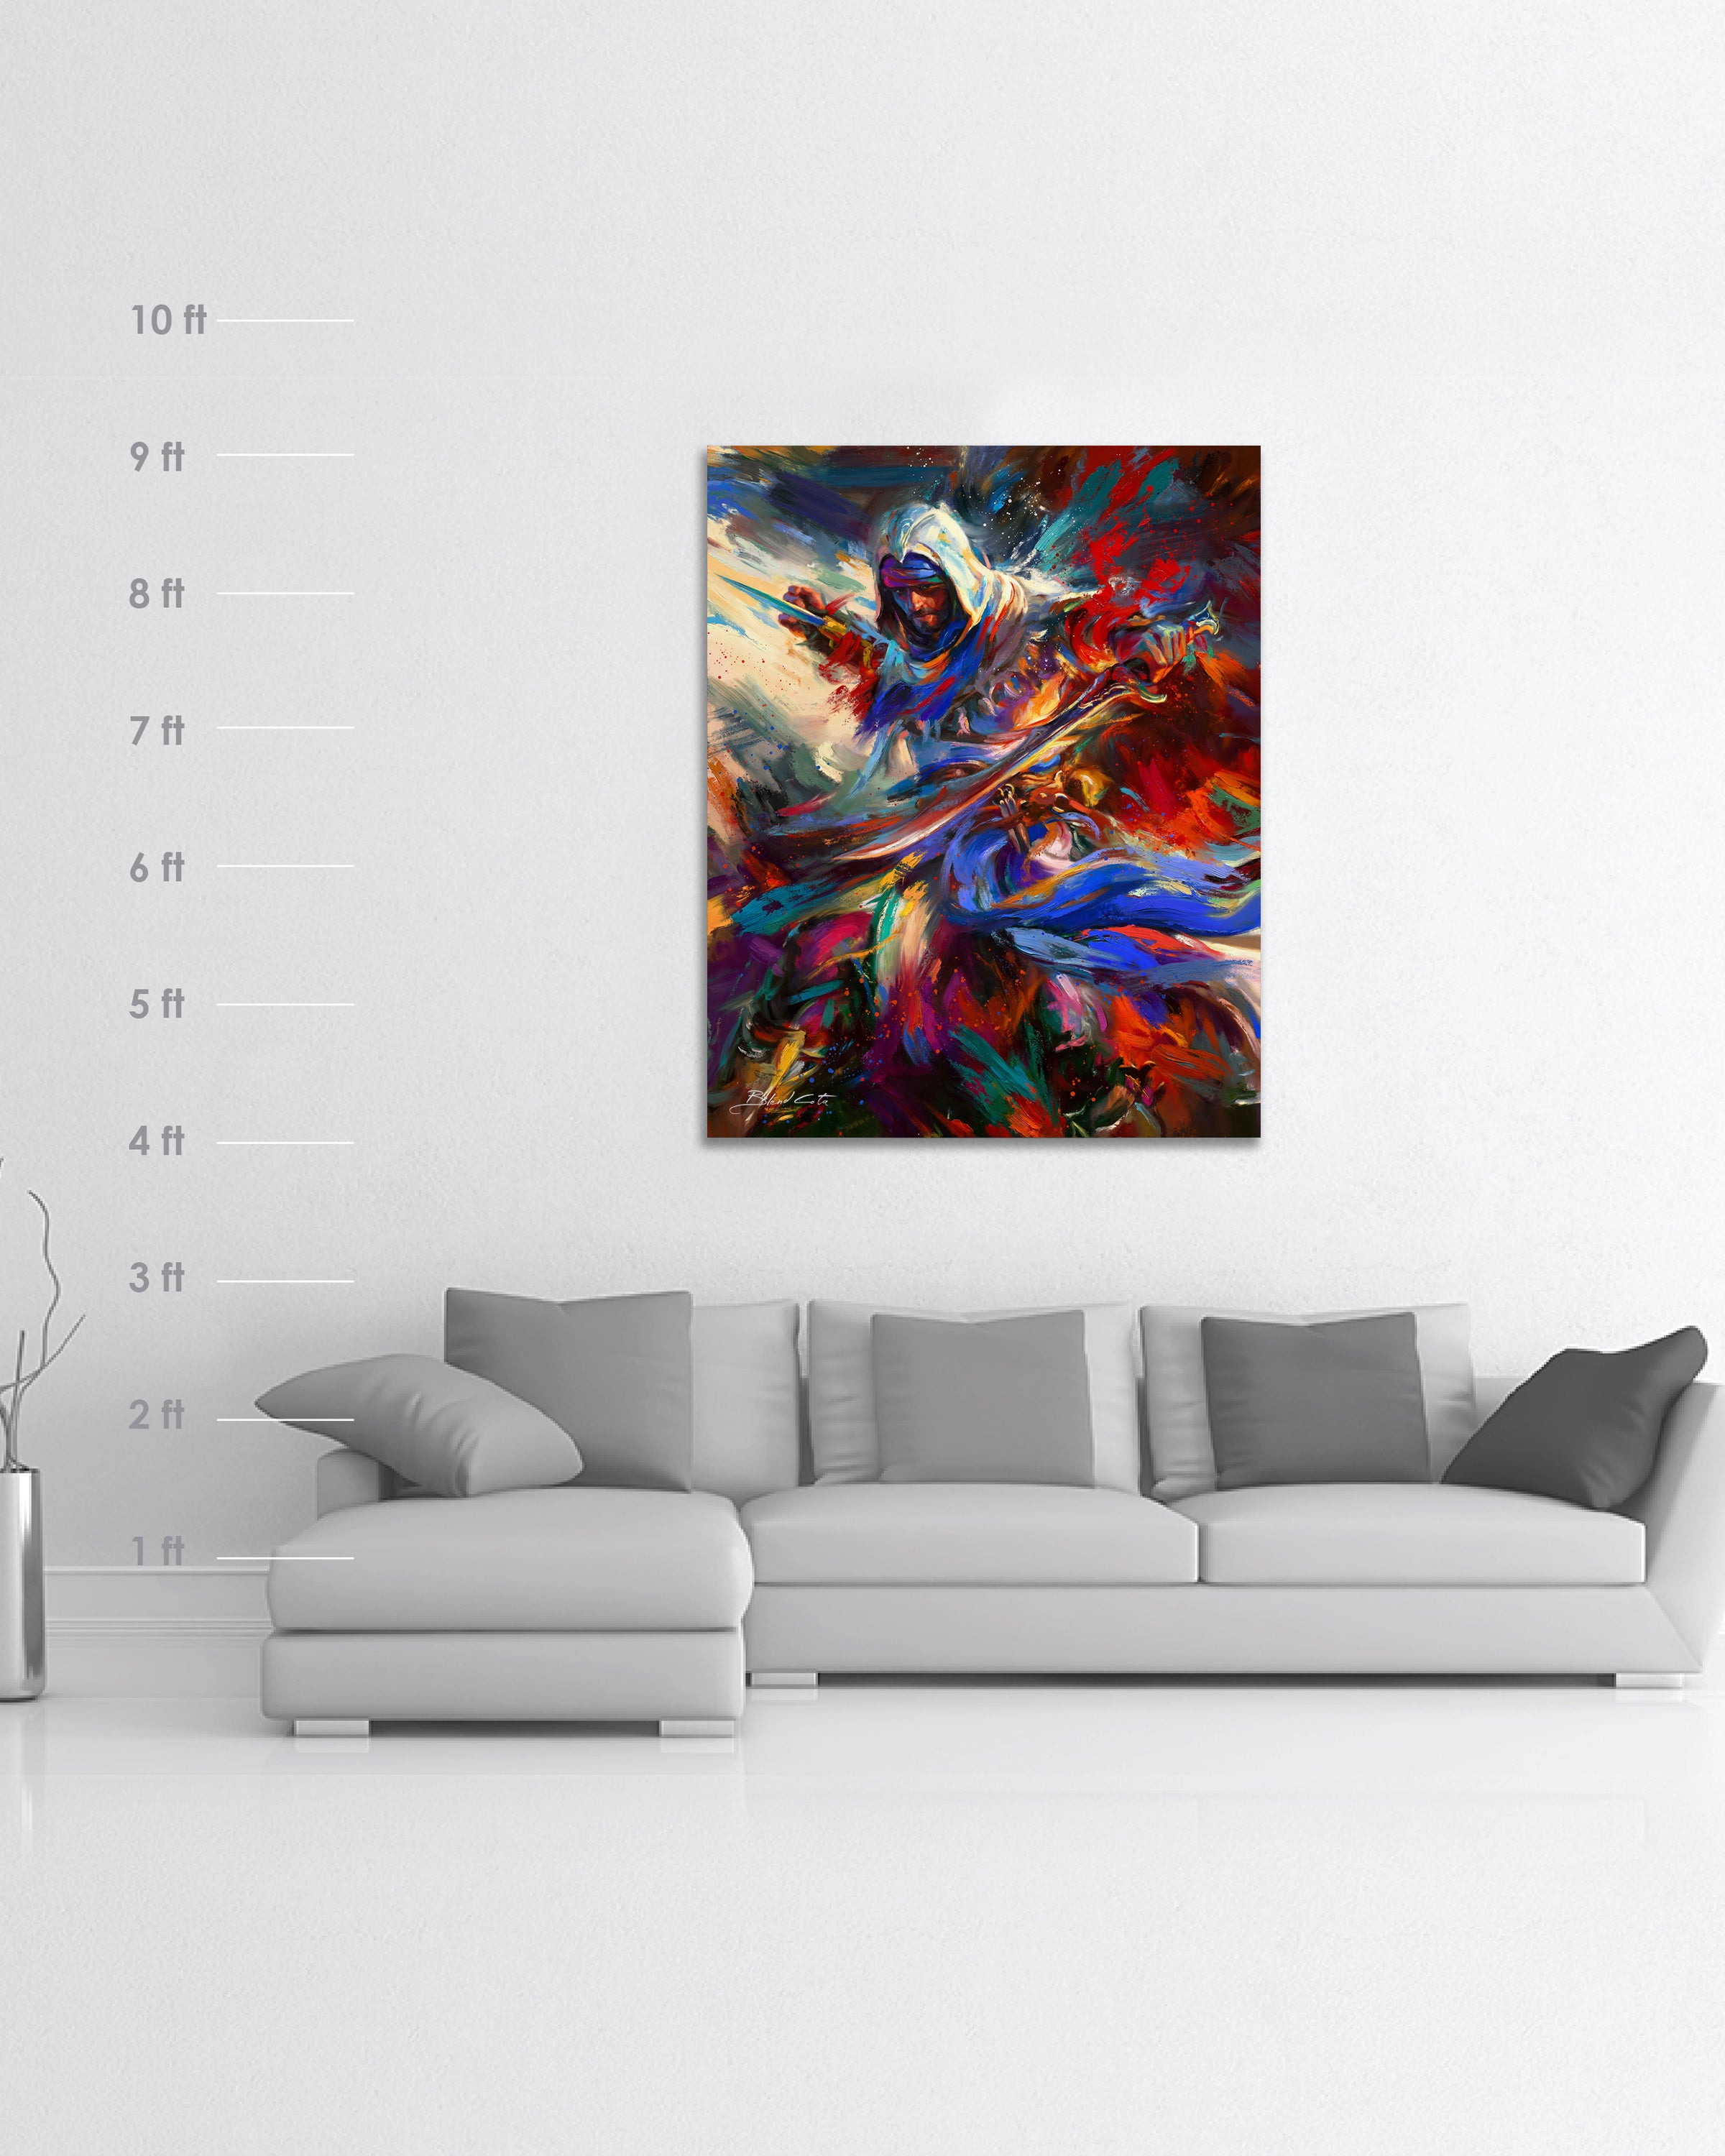 
                  
                    Original oil painting on canvas of Assassin's Creed Basim of Mirage bursting forth with energy and painted with colorful brushstrokes in an expressionistic style in a room setting with dimensions for scale.
                  
                